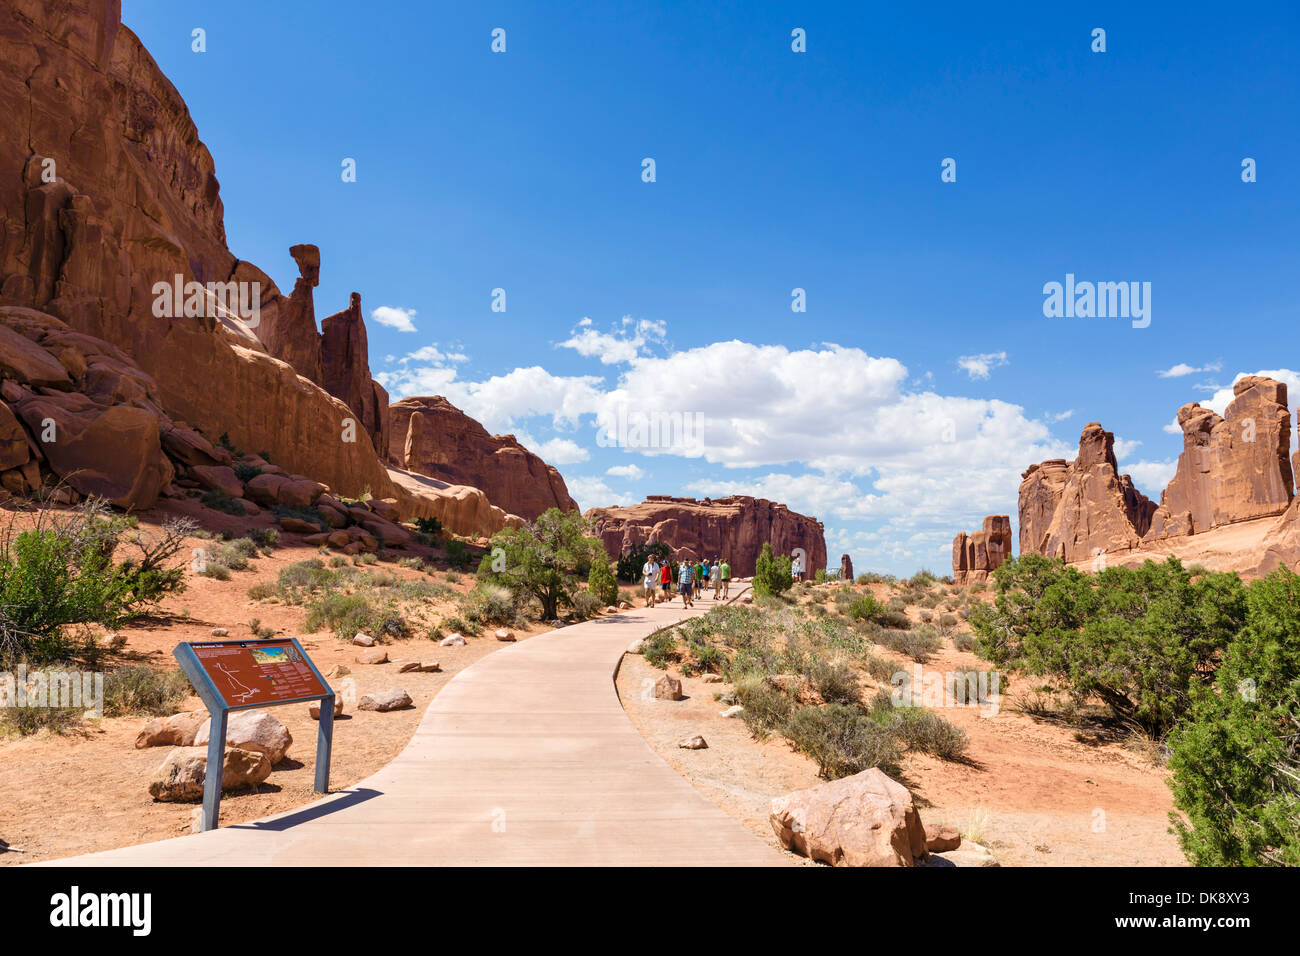 Walkers on the Park Avenue Trail, Arches National Park, Utah, USA Stock Photo